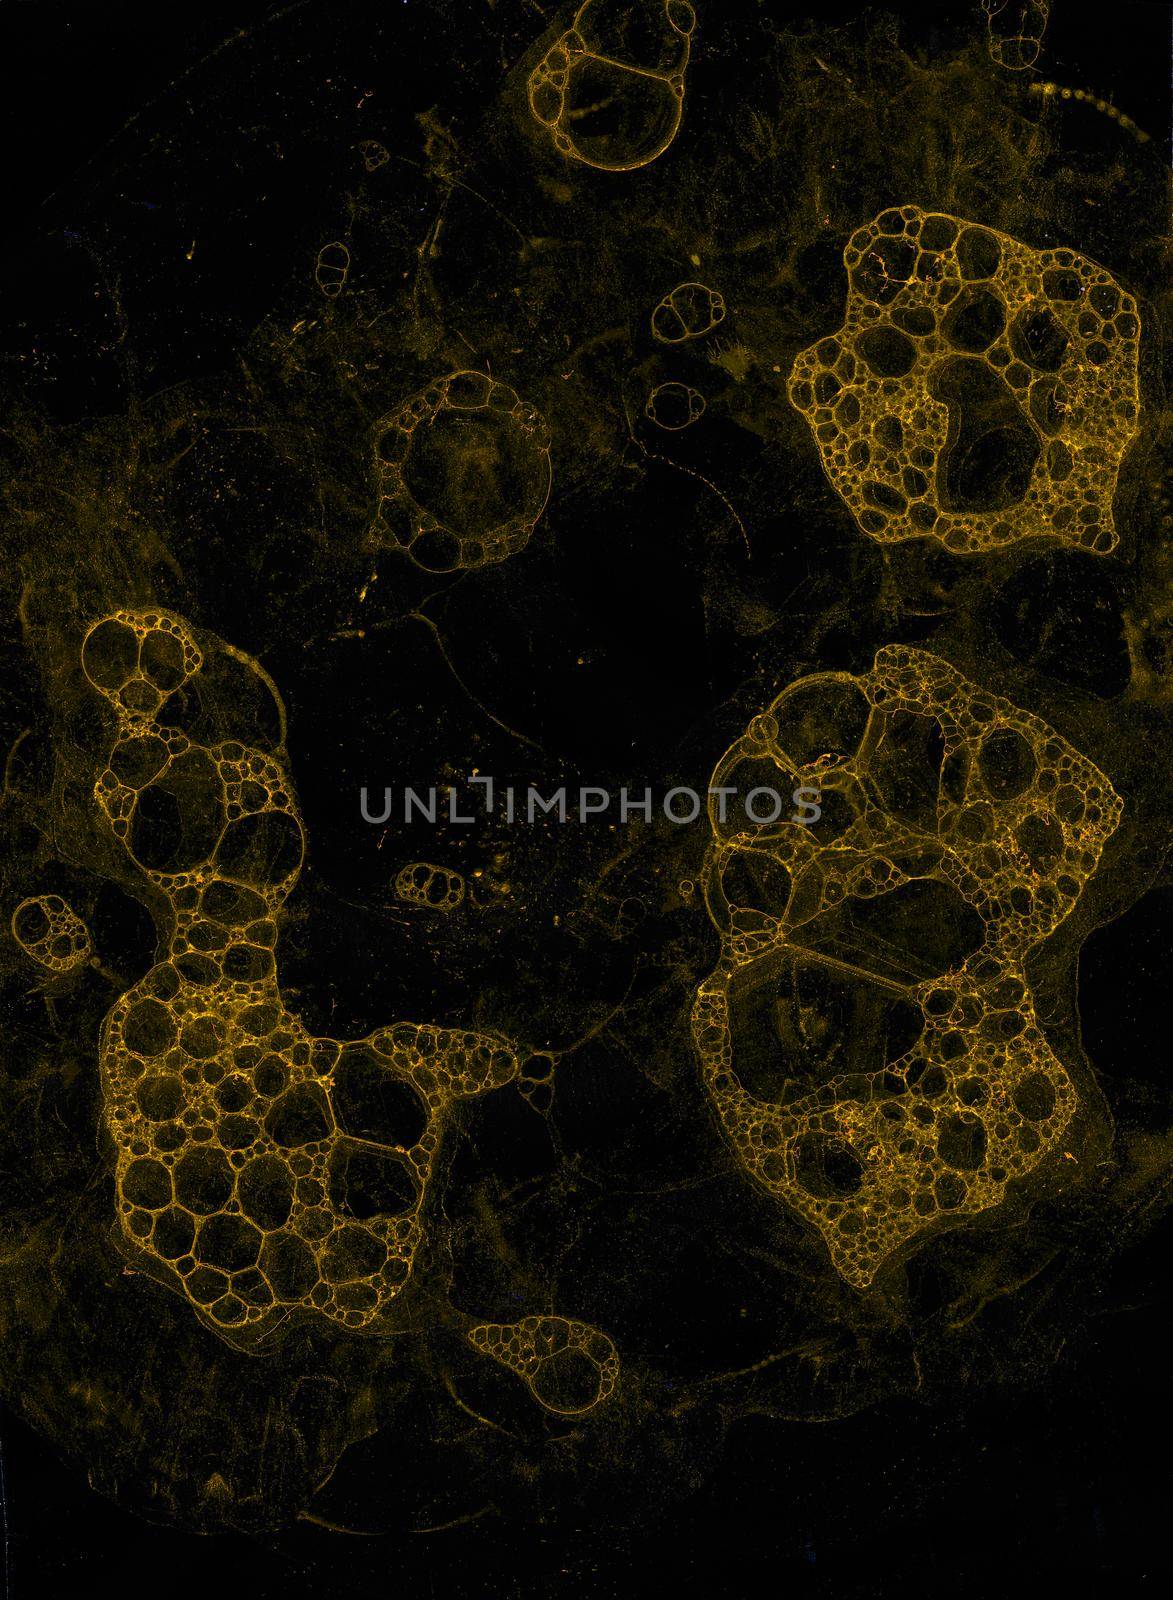 Abstract grunge cellular background against black